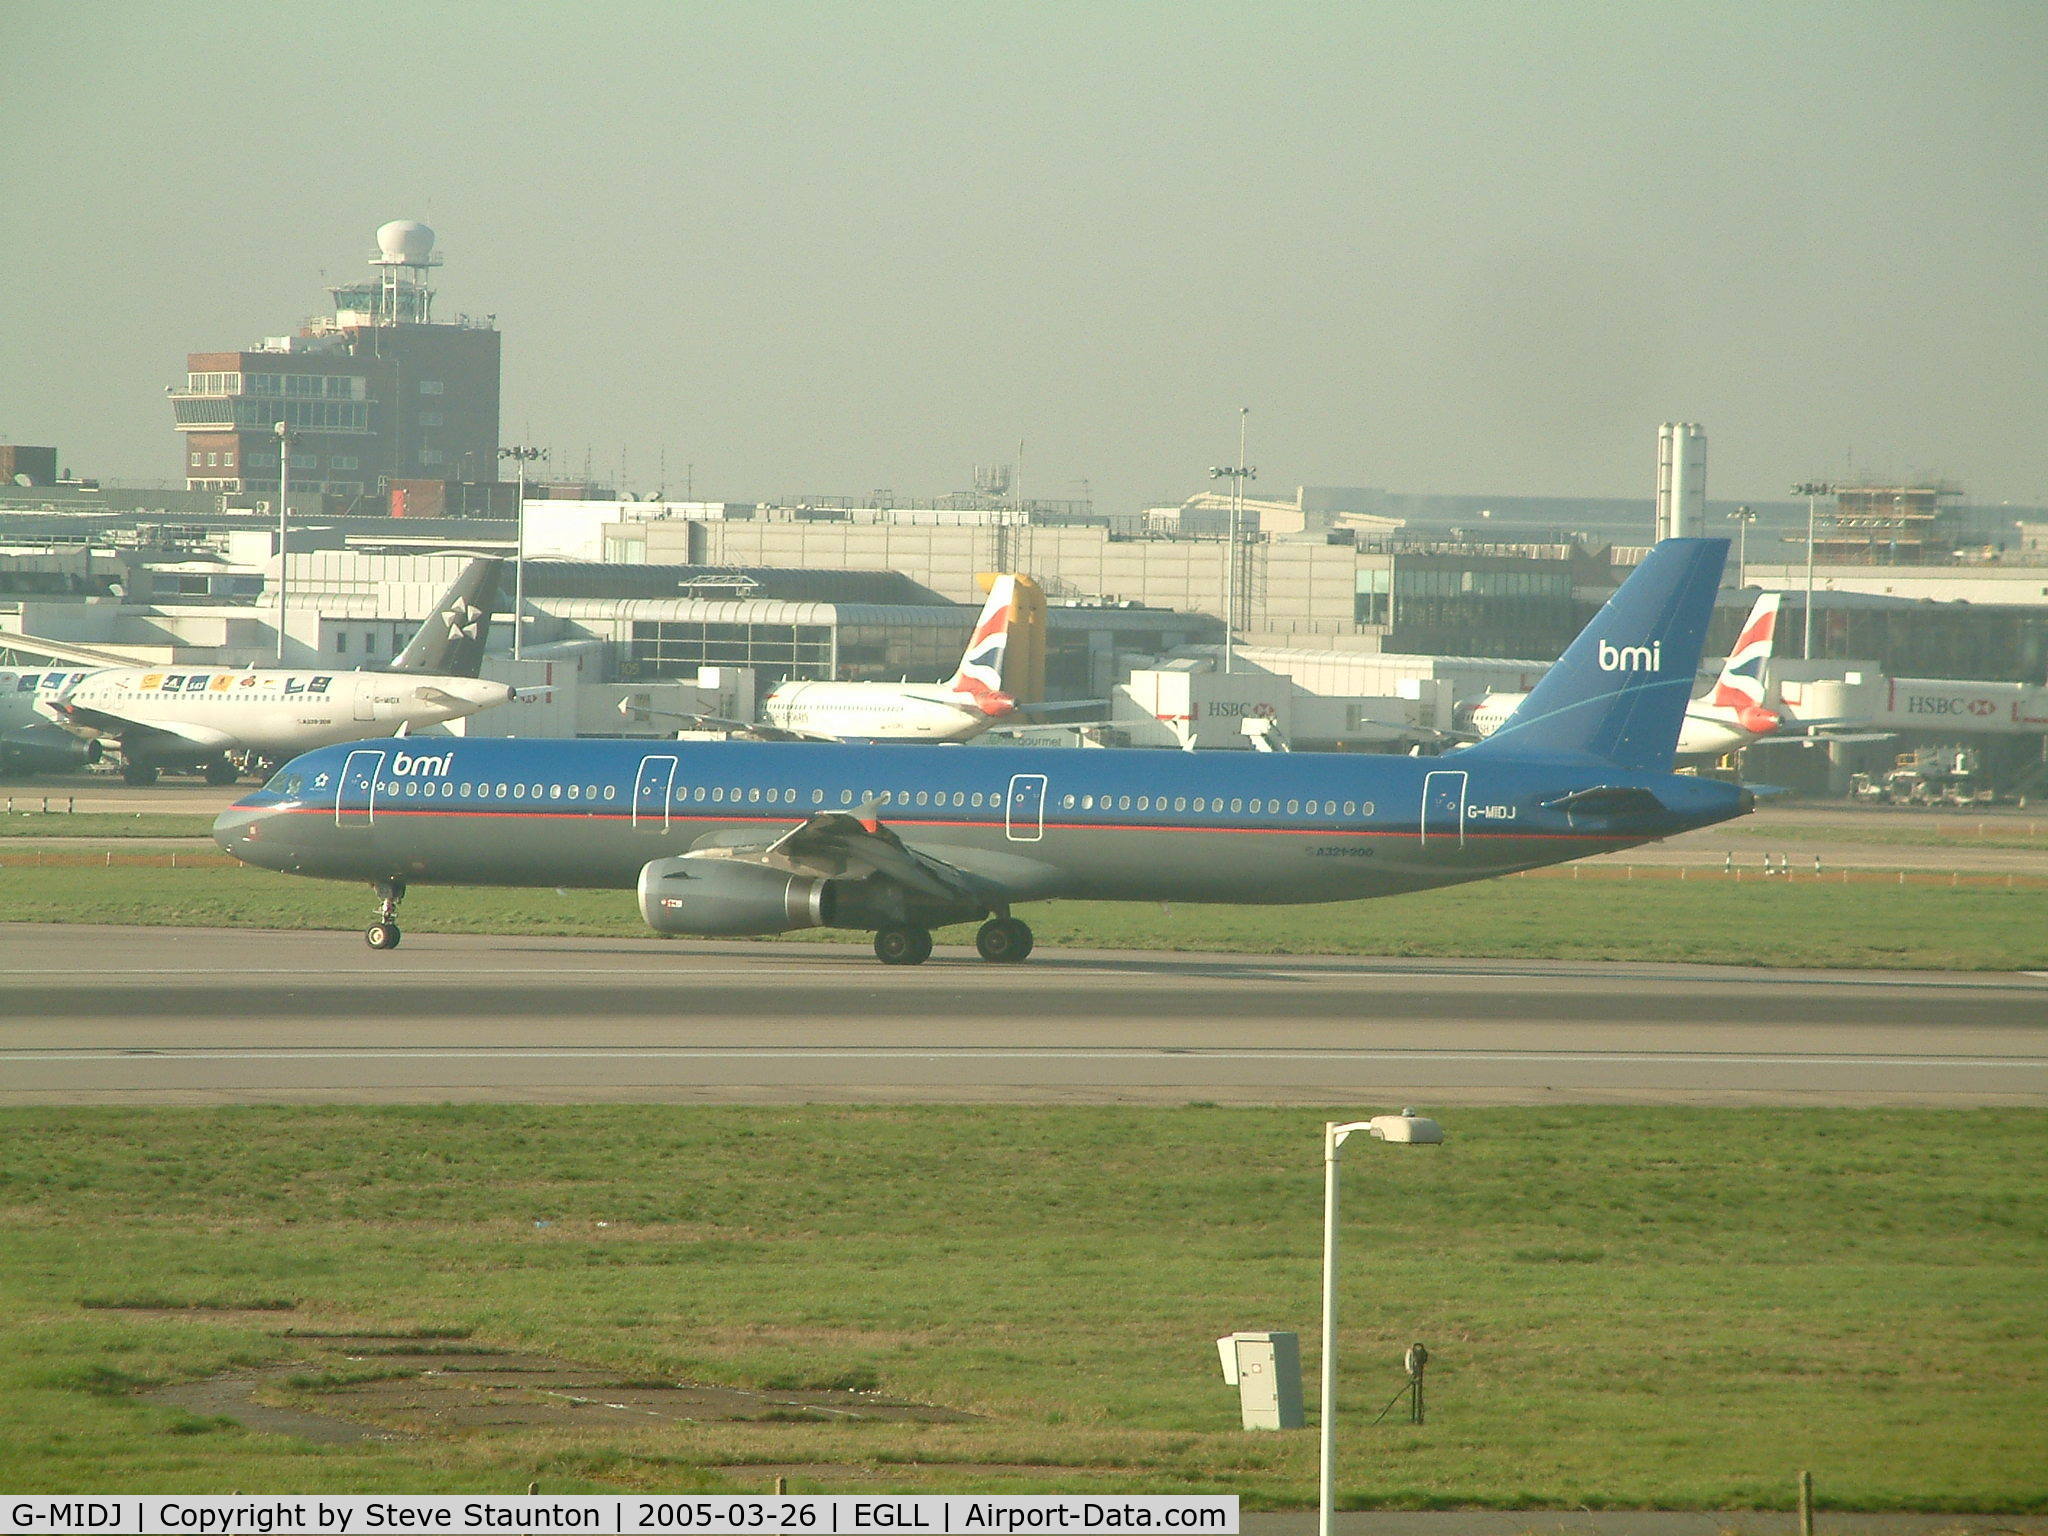 G-MIDJ, 1999 Airbus A321-231 C/N 1045, Taken at Heathrow Airport March 2005